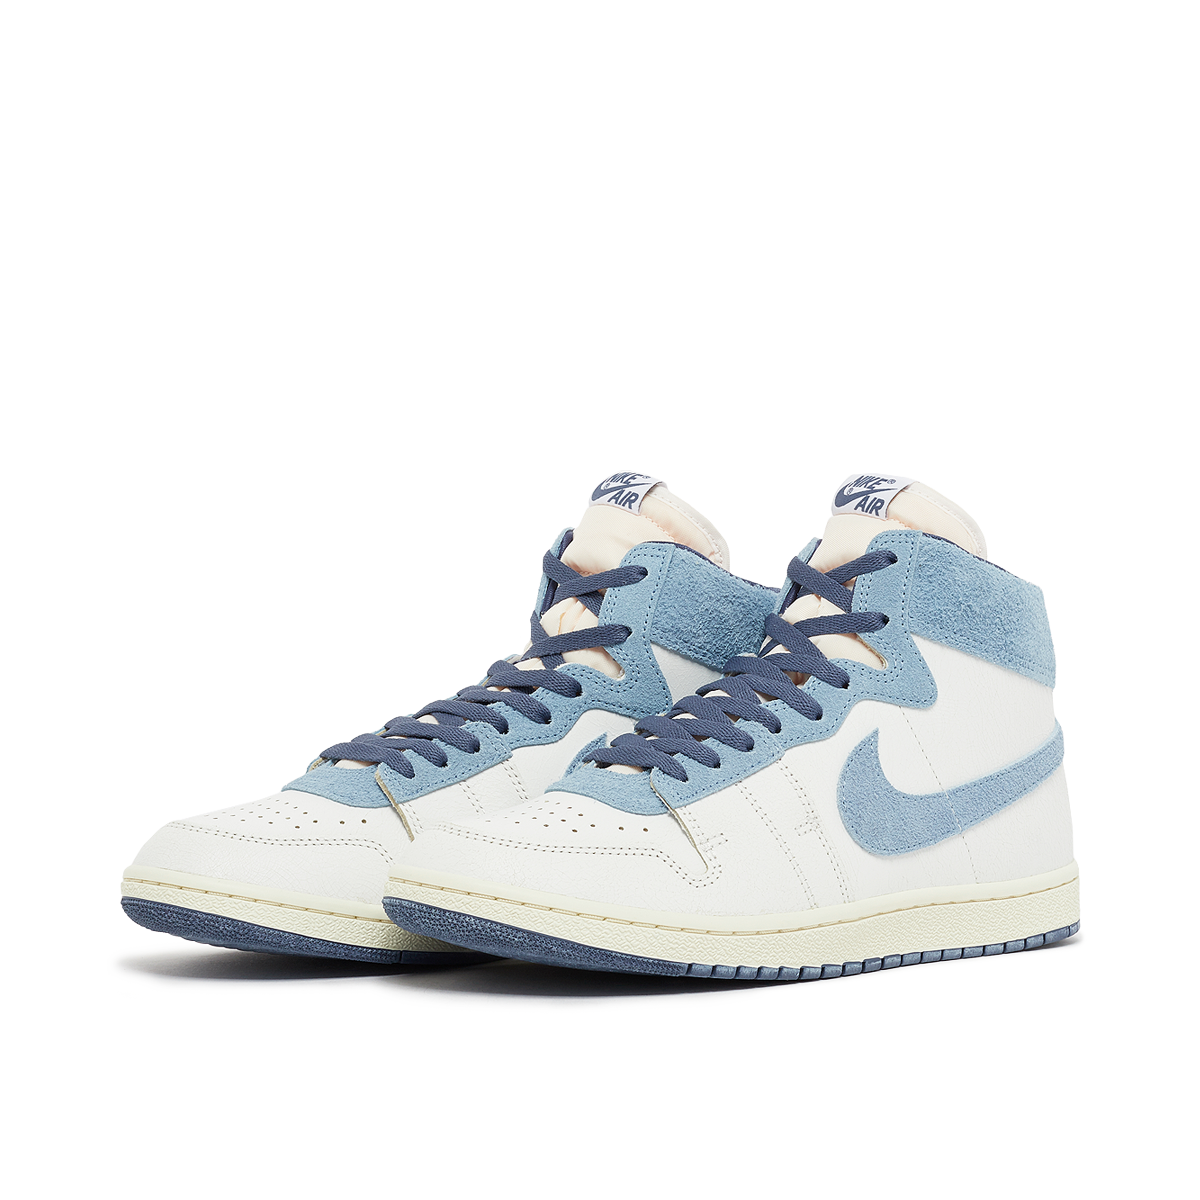 Wmns Air Ship PE SP "Every Game" (Diffused Blue)